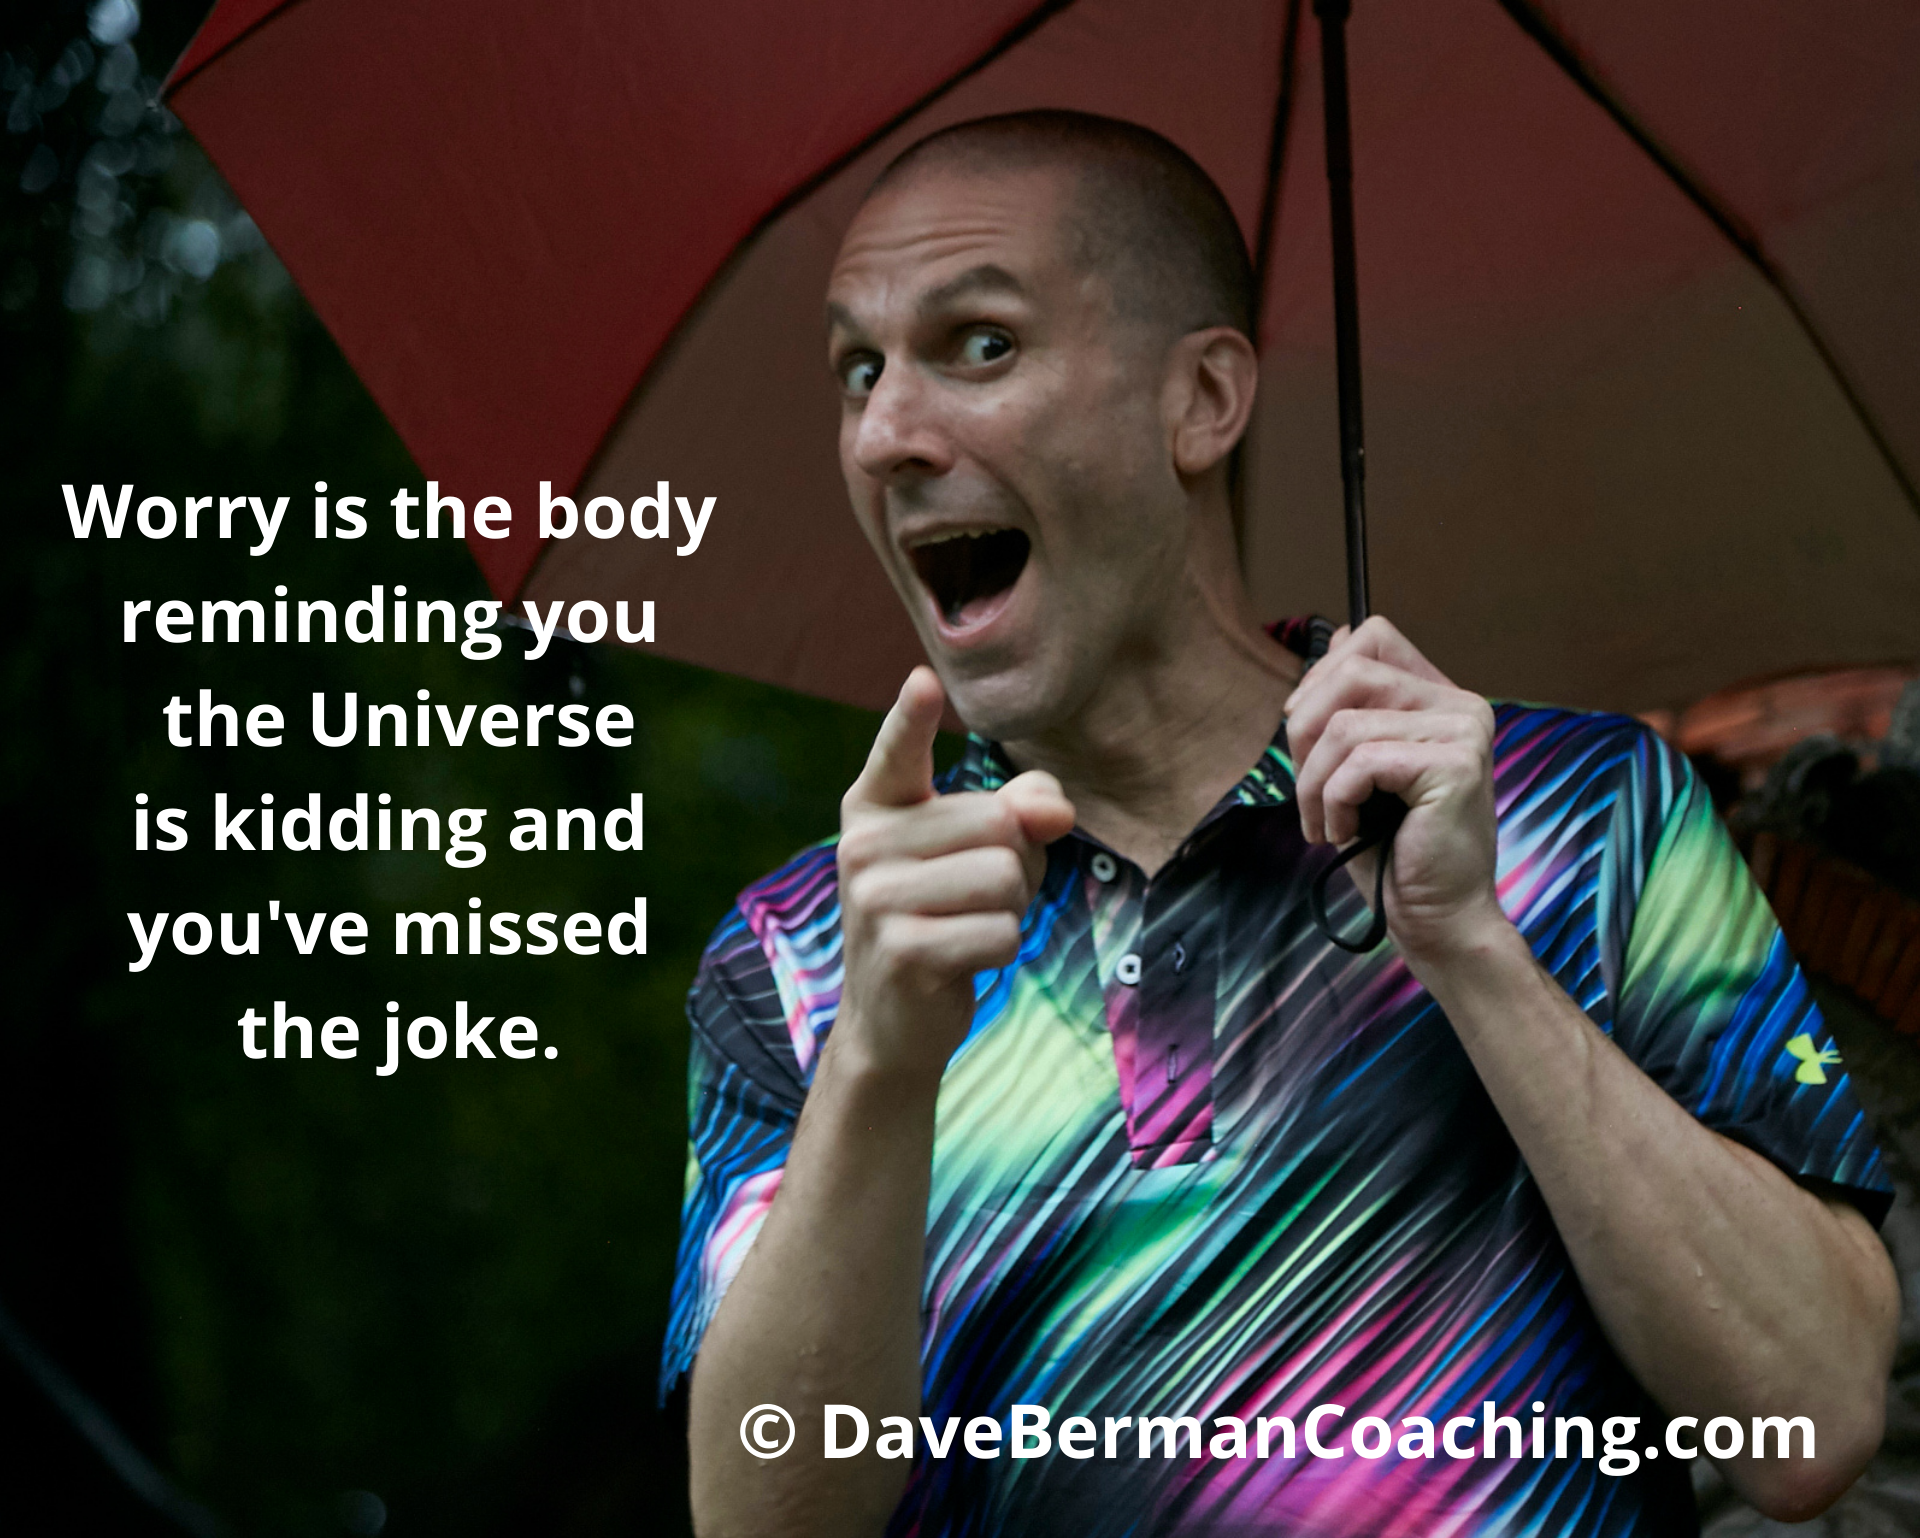 Worry is the body reminding you the Universe is kidding and you've missed the joke - DaveBermanCoaching.com